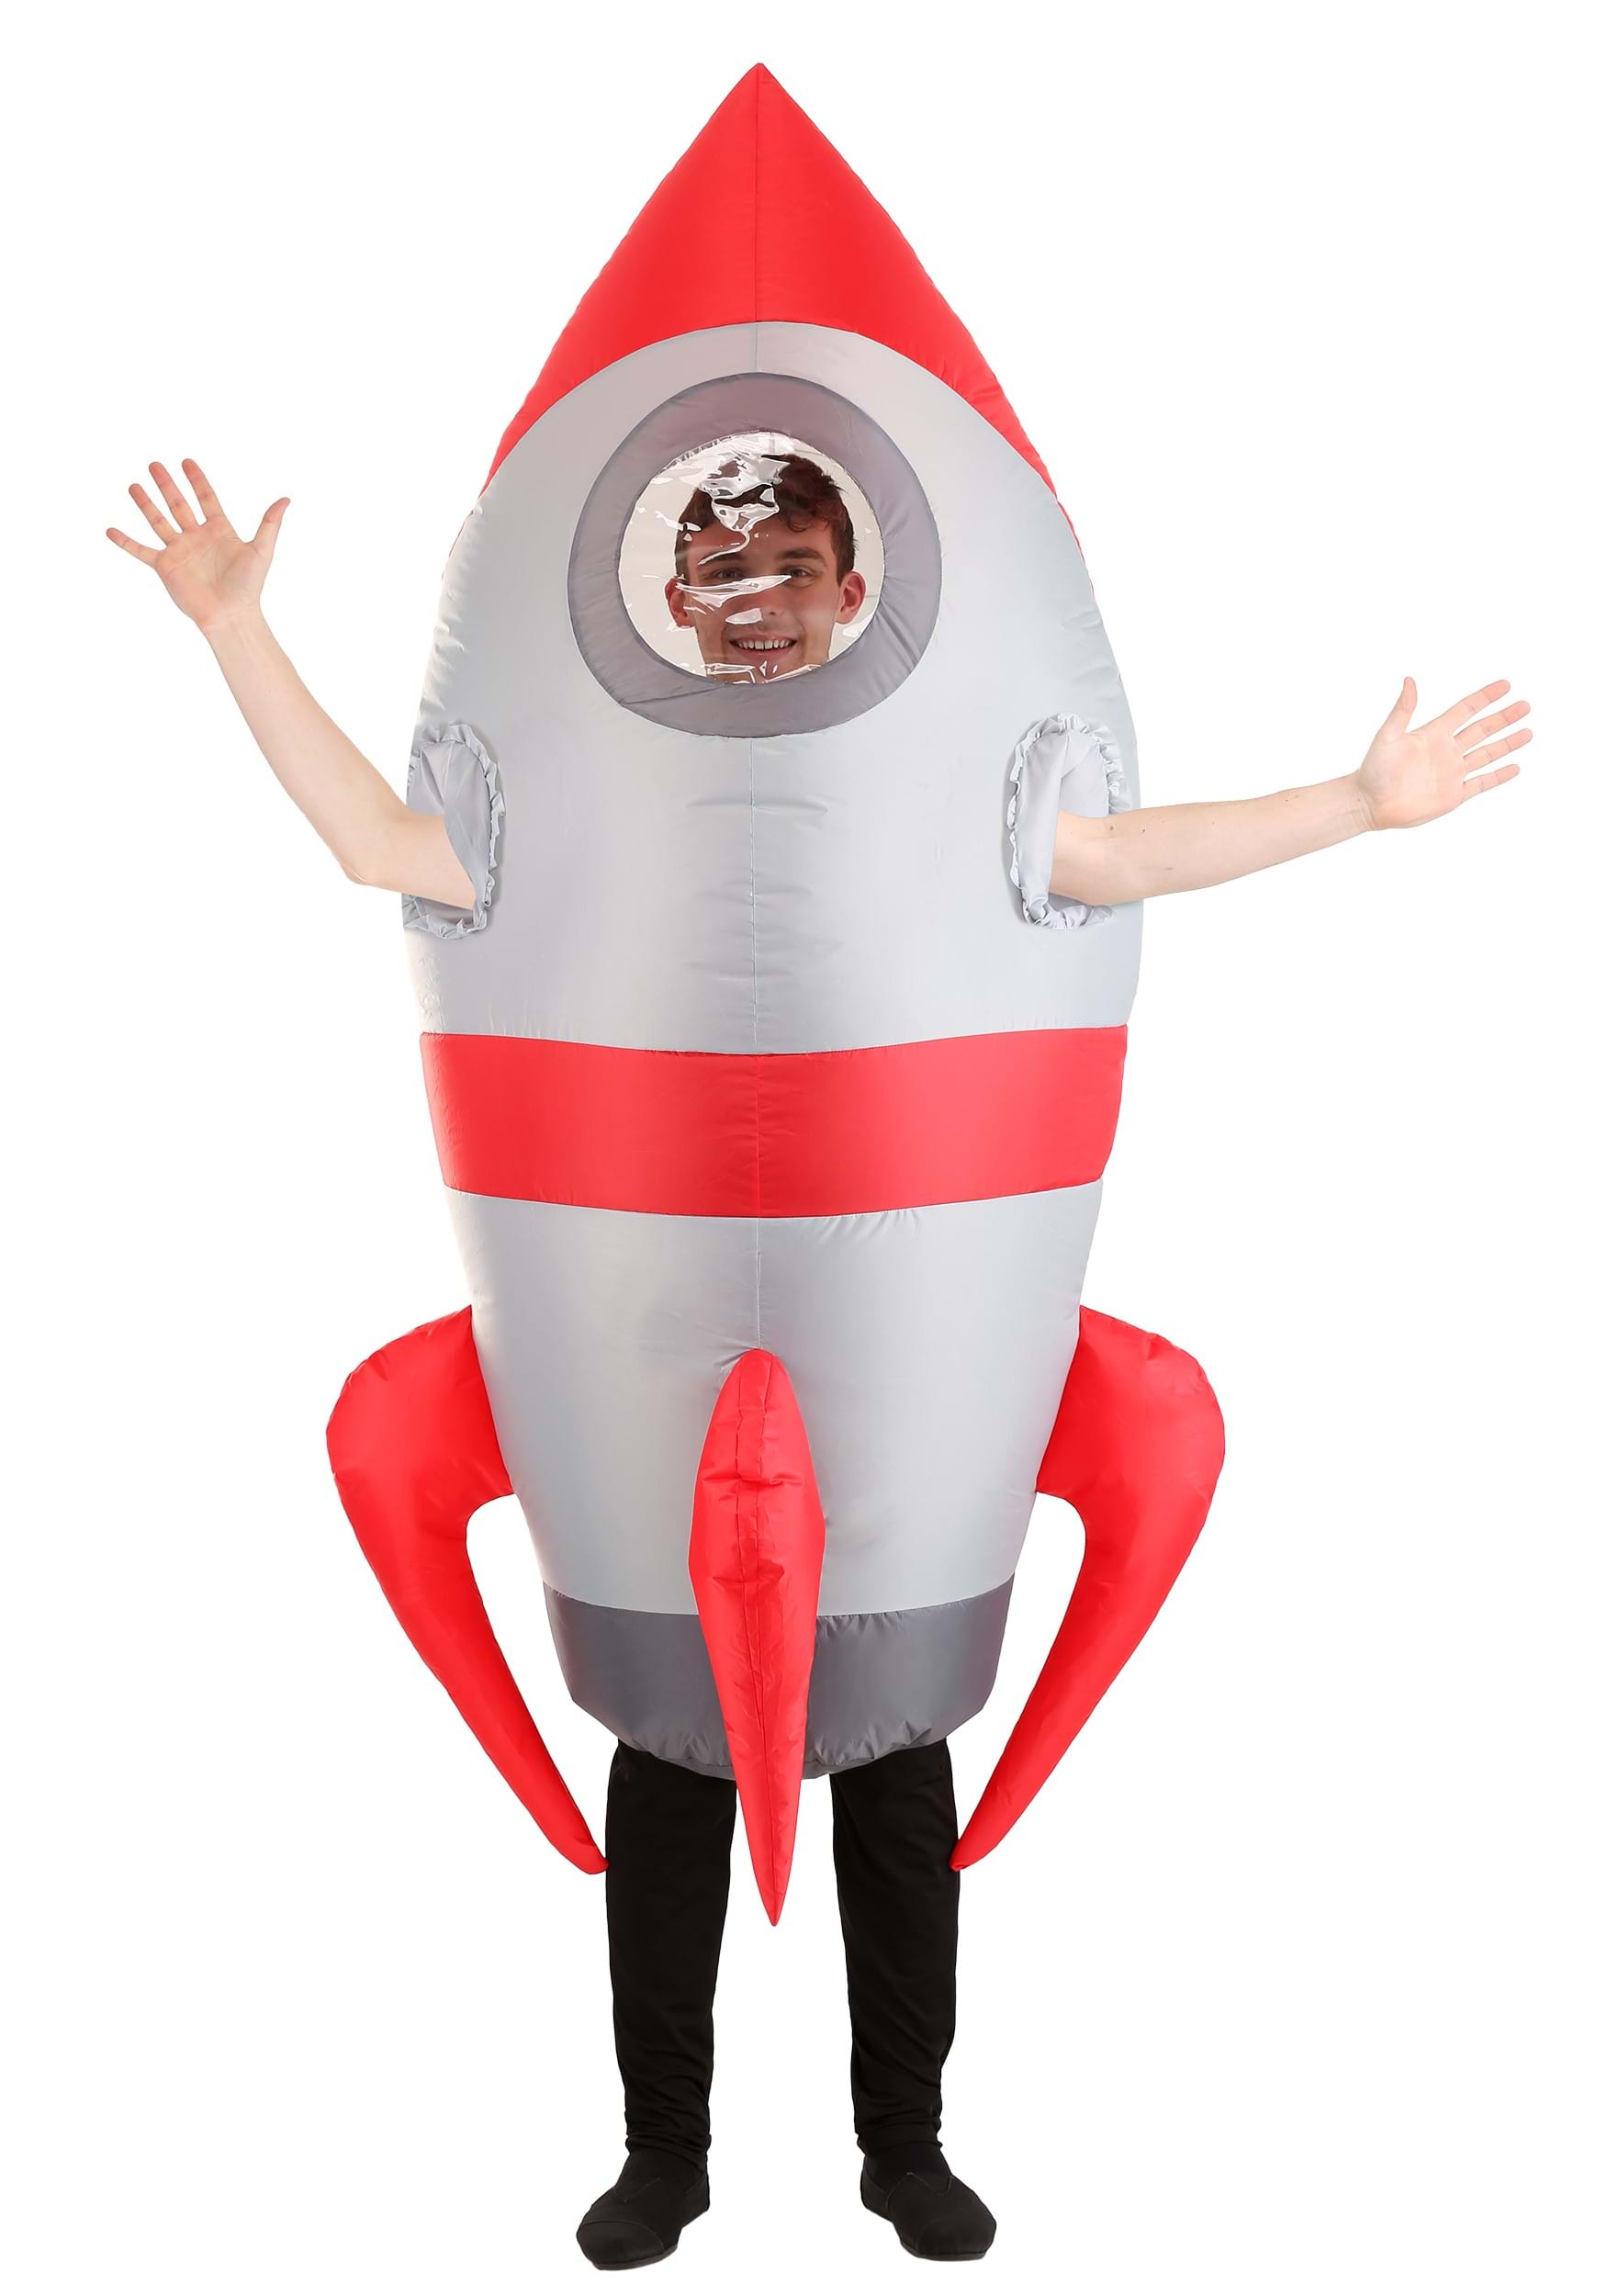 Inflatable Rocket Ship Adult Costume